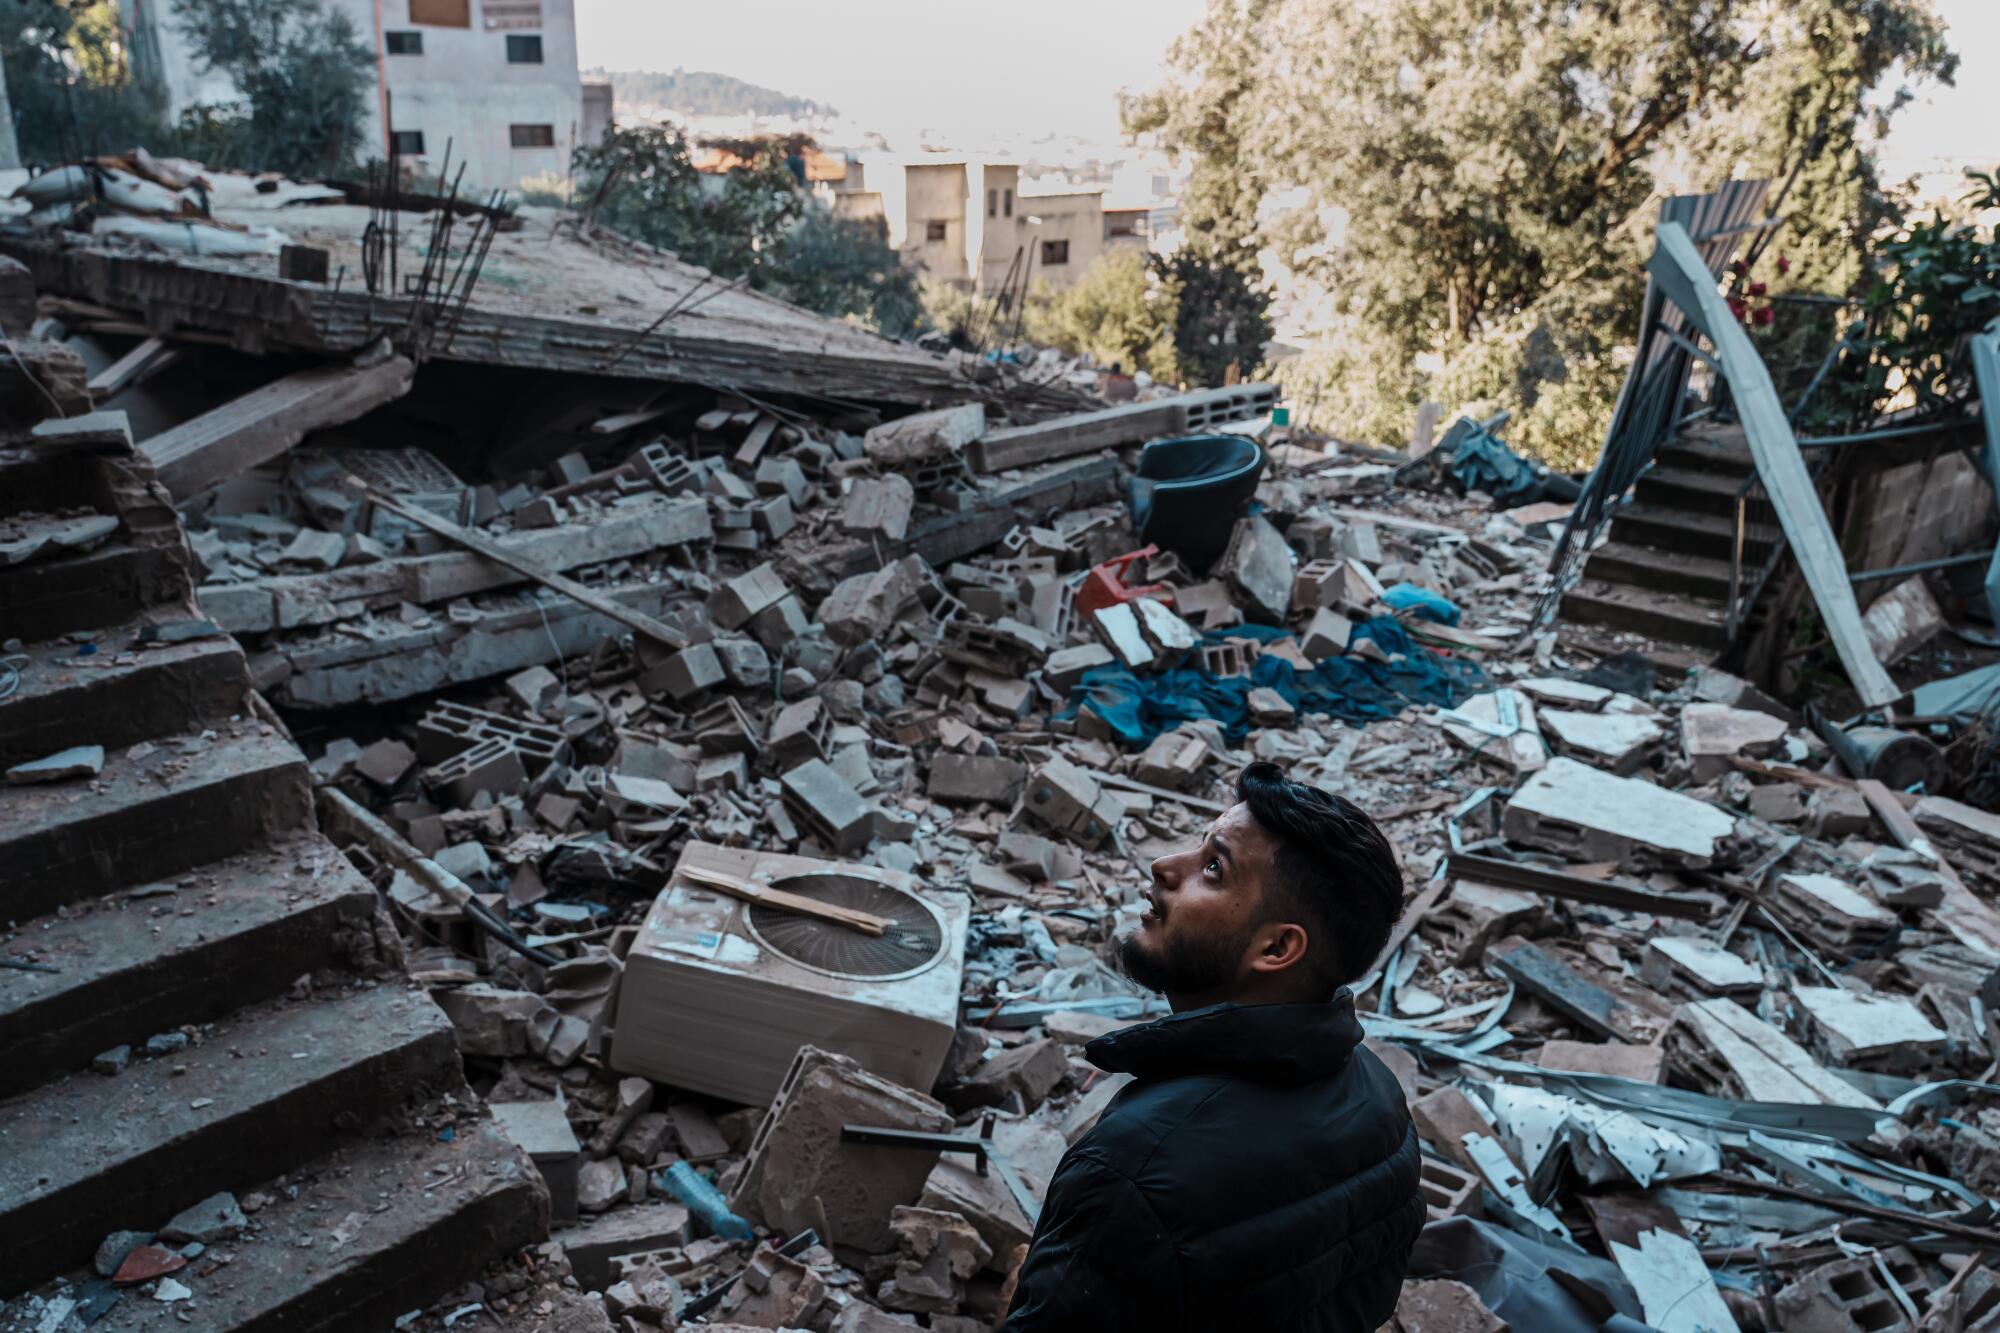  Ehab Maher Nafeer Mareei looks up to examine the remnants of his home after an Israeli airstrike destroyed it.